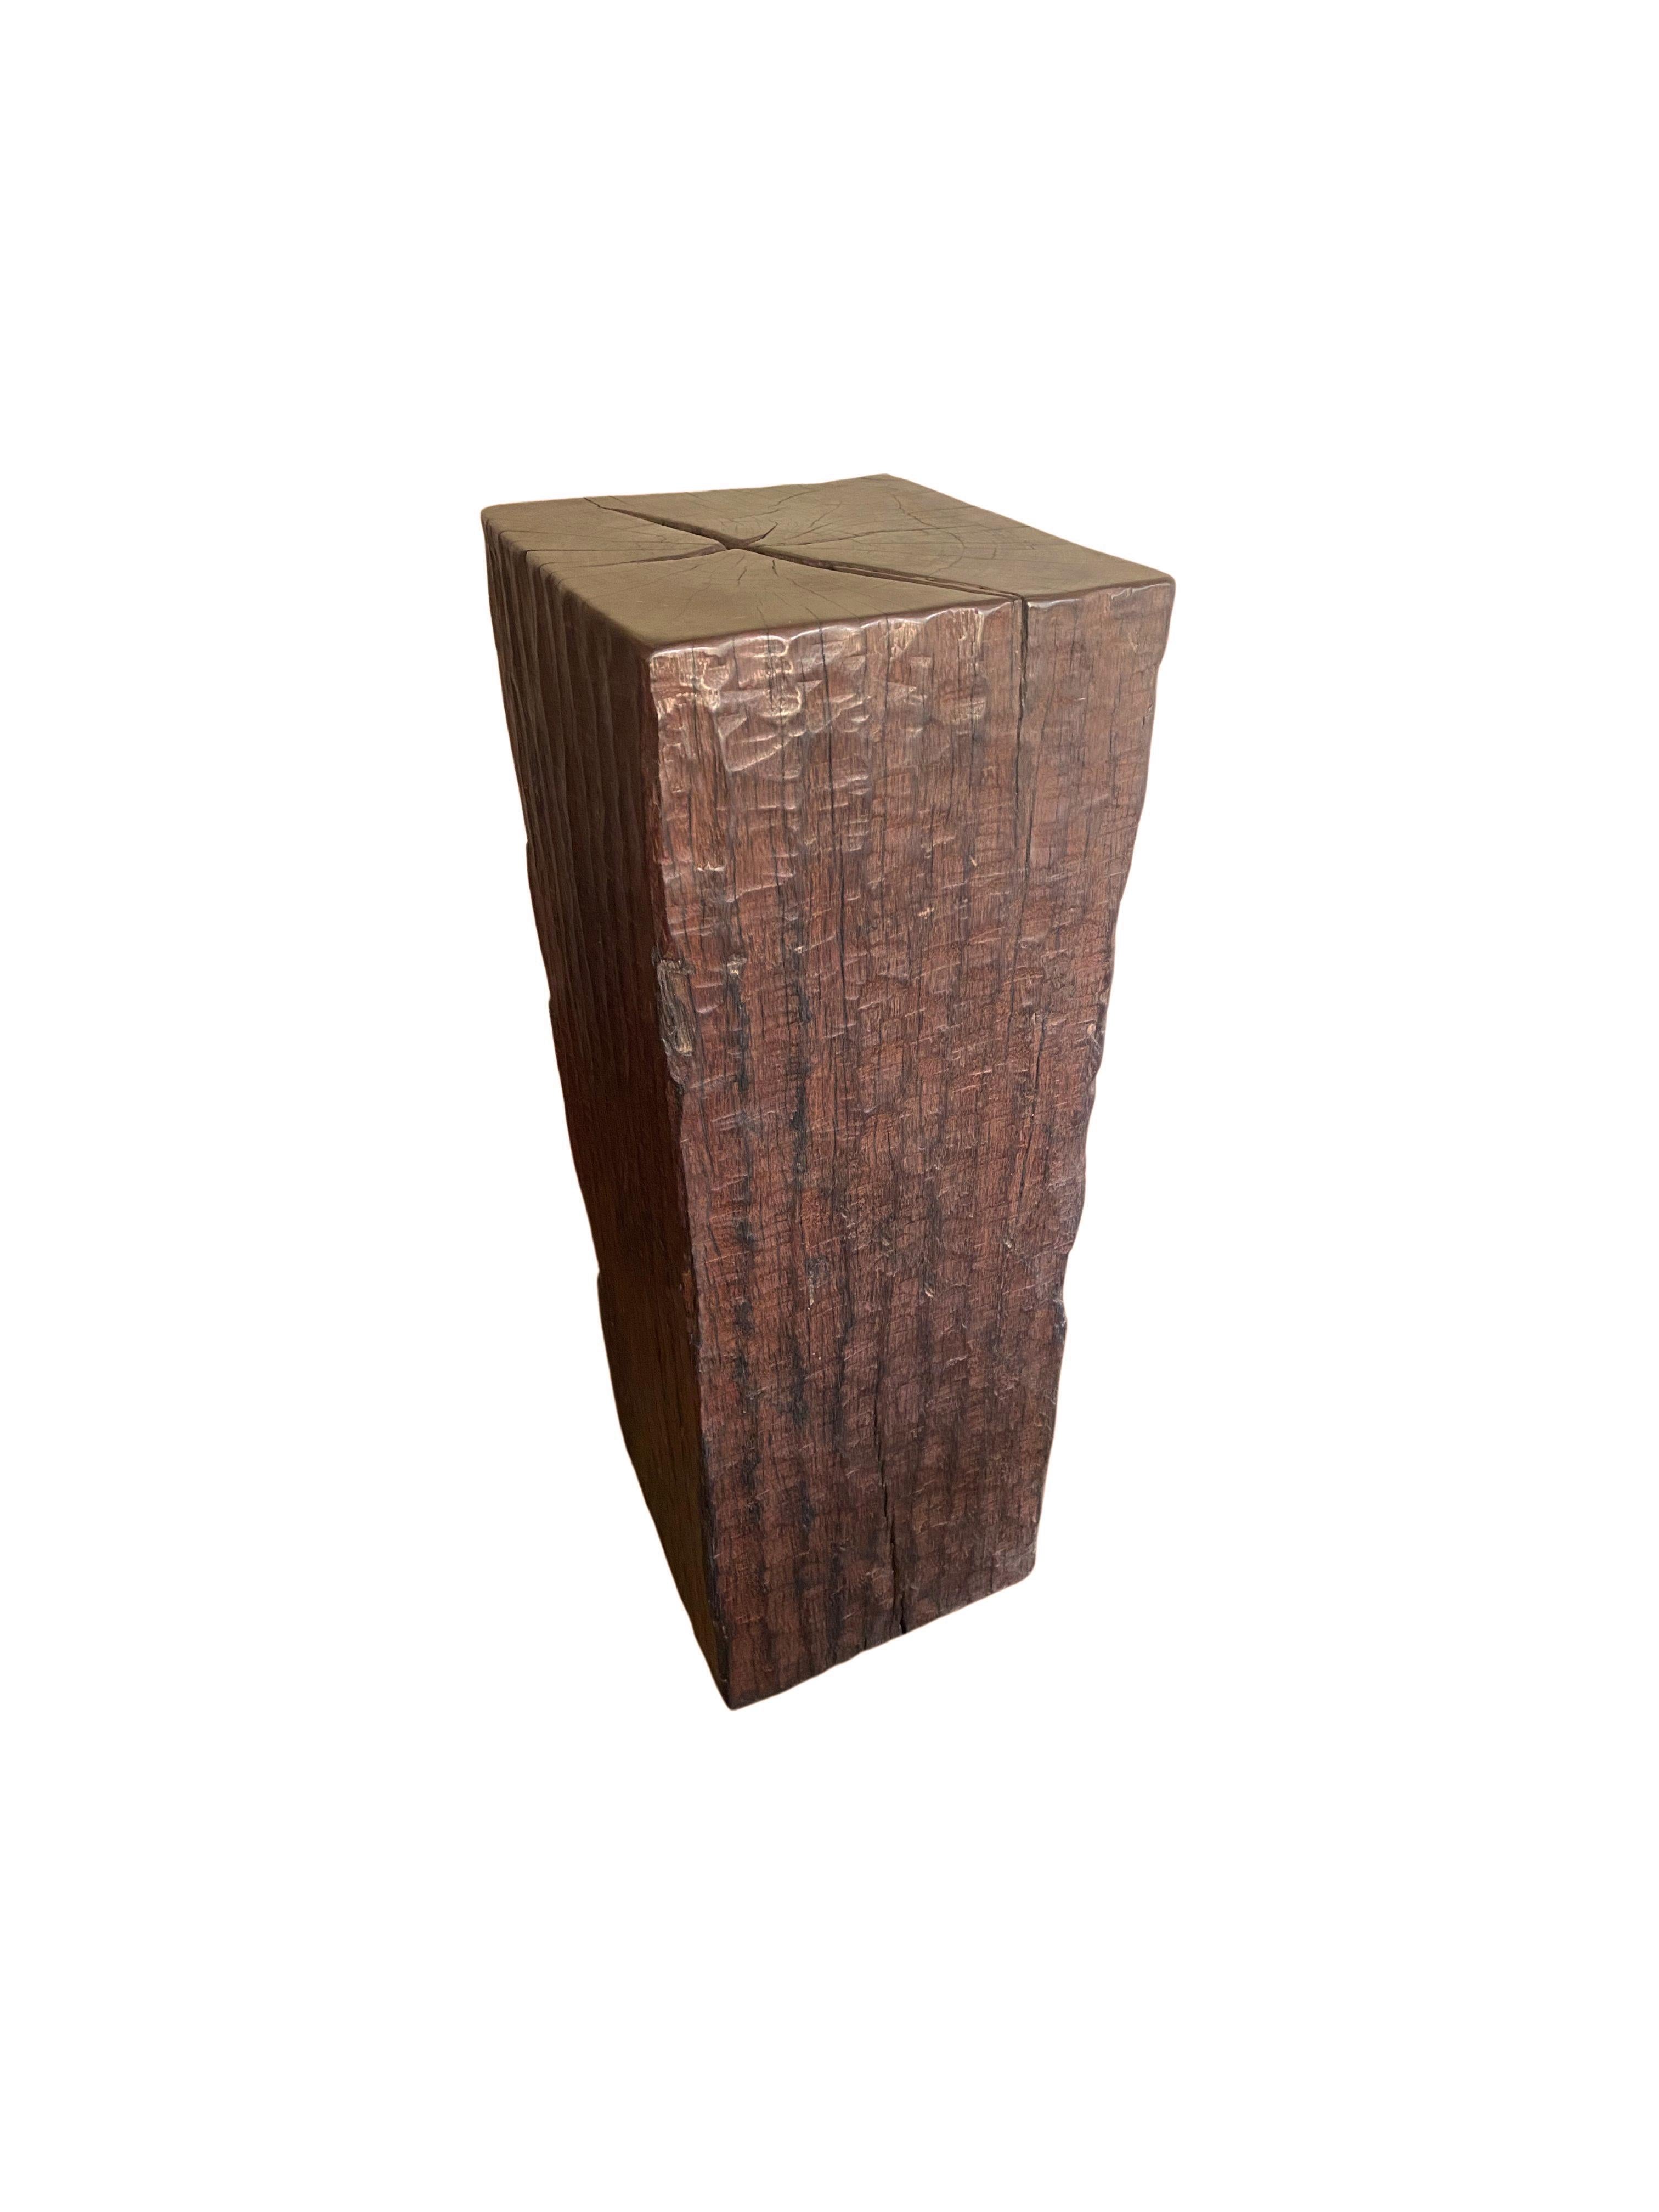 Hand-Crafted Solid Iron Wood Pedestal with Stunning Wood Texture For Sale